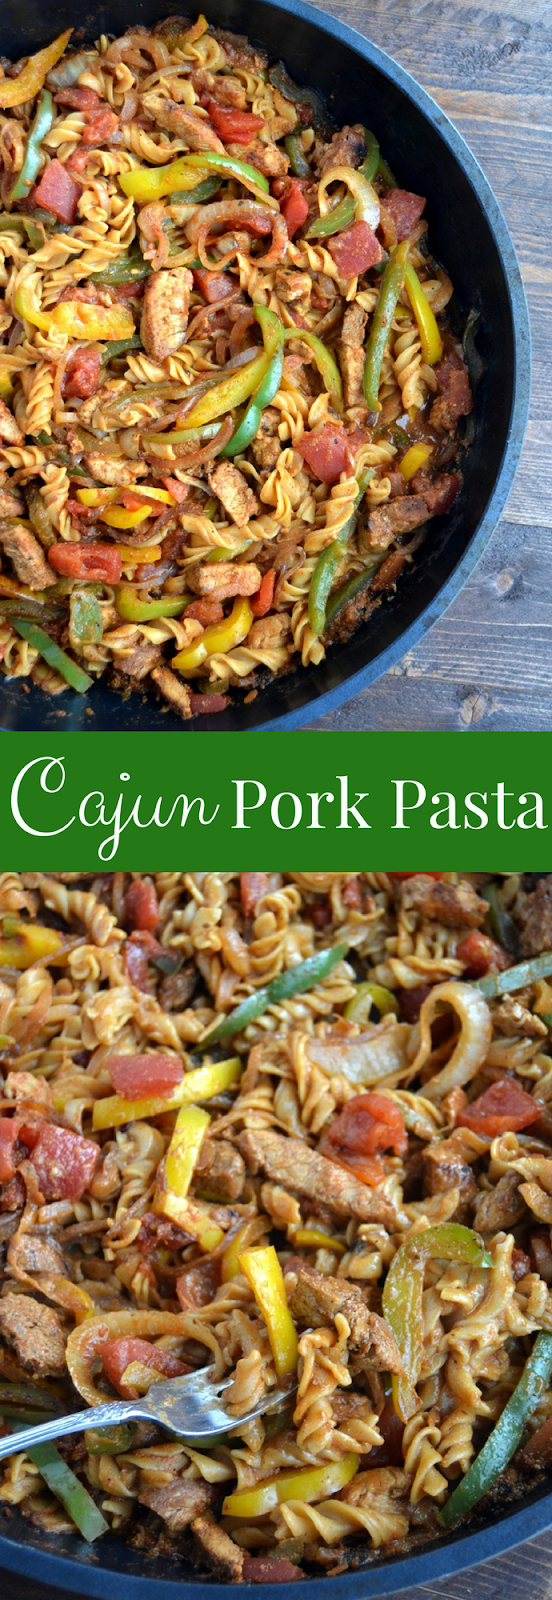 Cajun Pork Pasta is loaded with sauteed bell peppers and onions, Cajun seasoned pork and creamy Cajun noodles and is ready in 30 minutes! www.nutritionistreviews.com